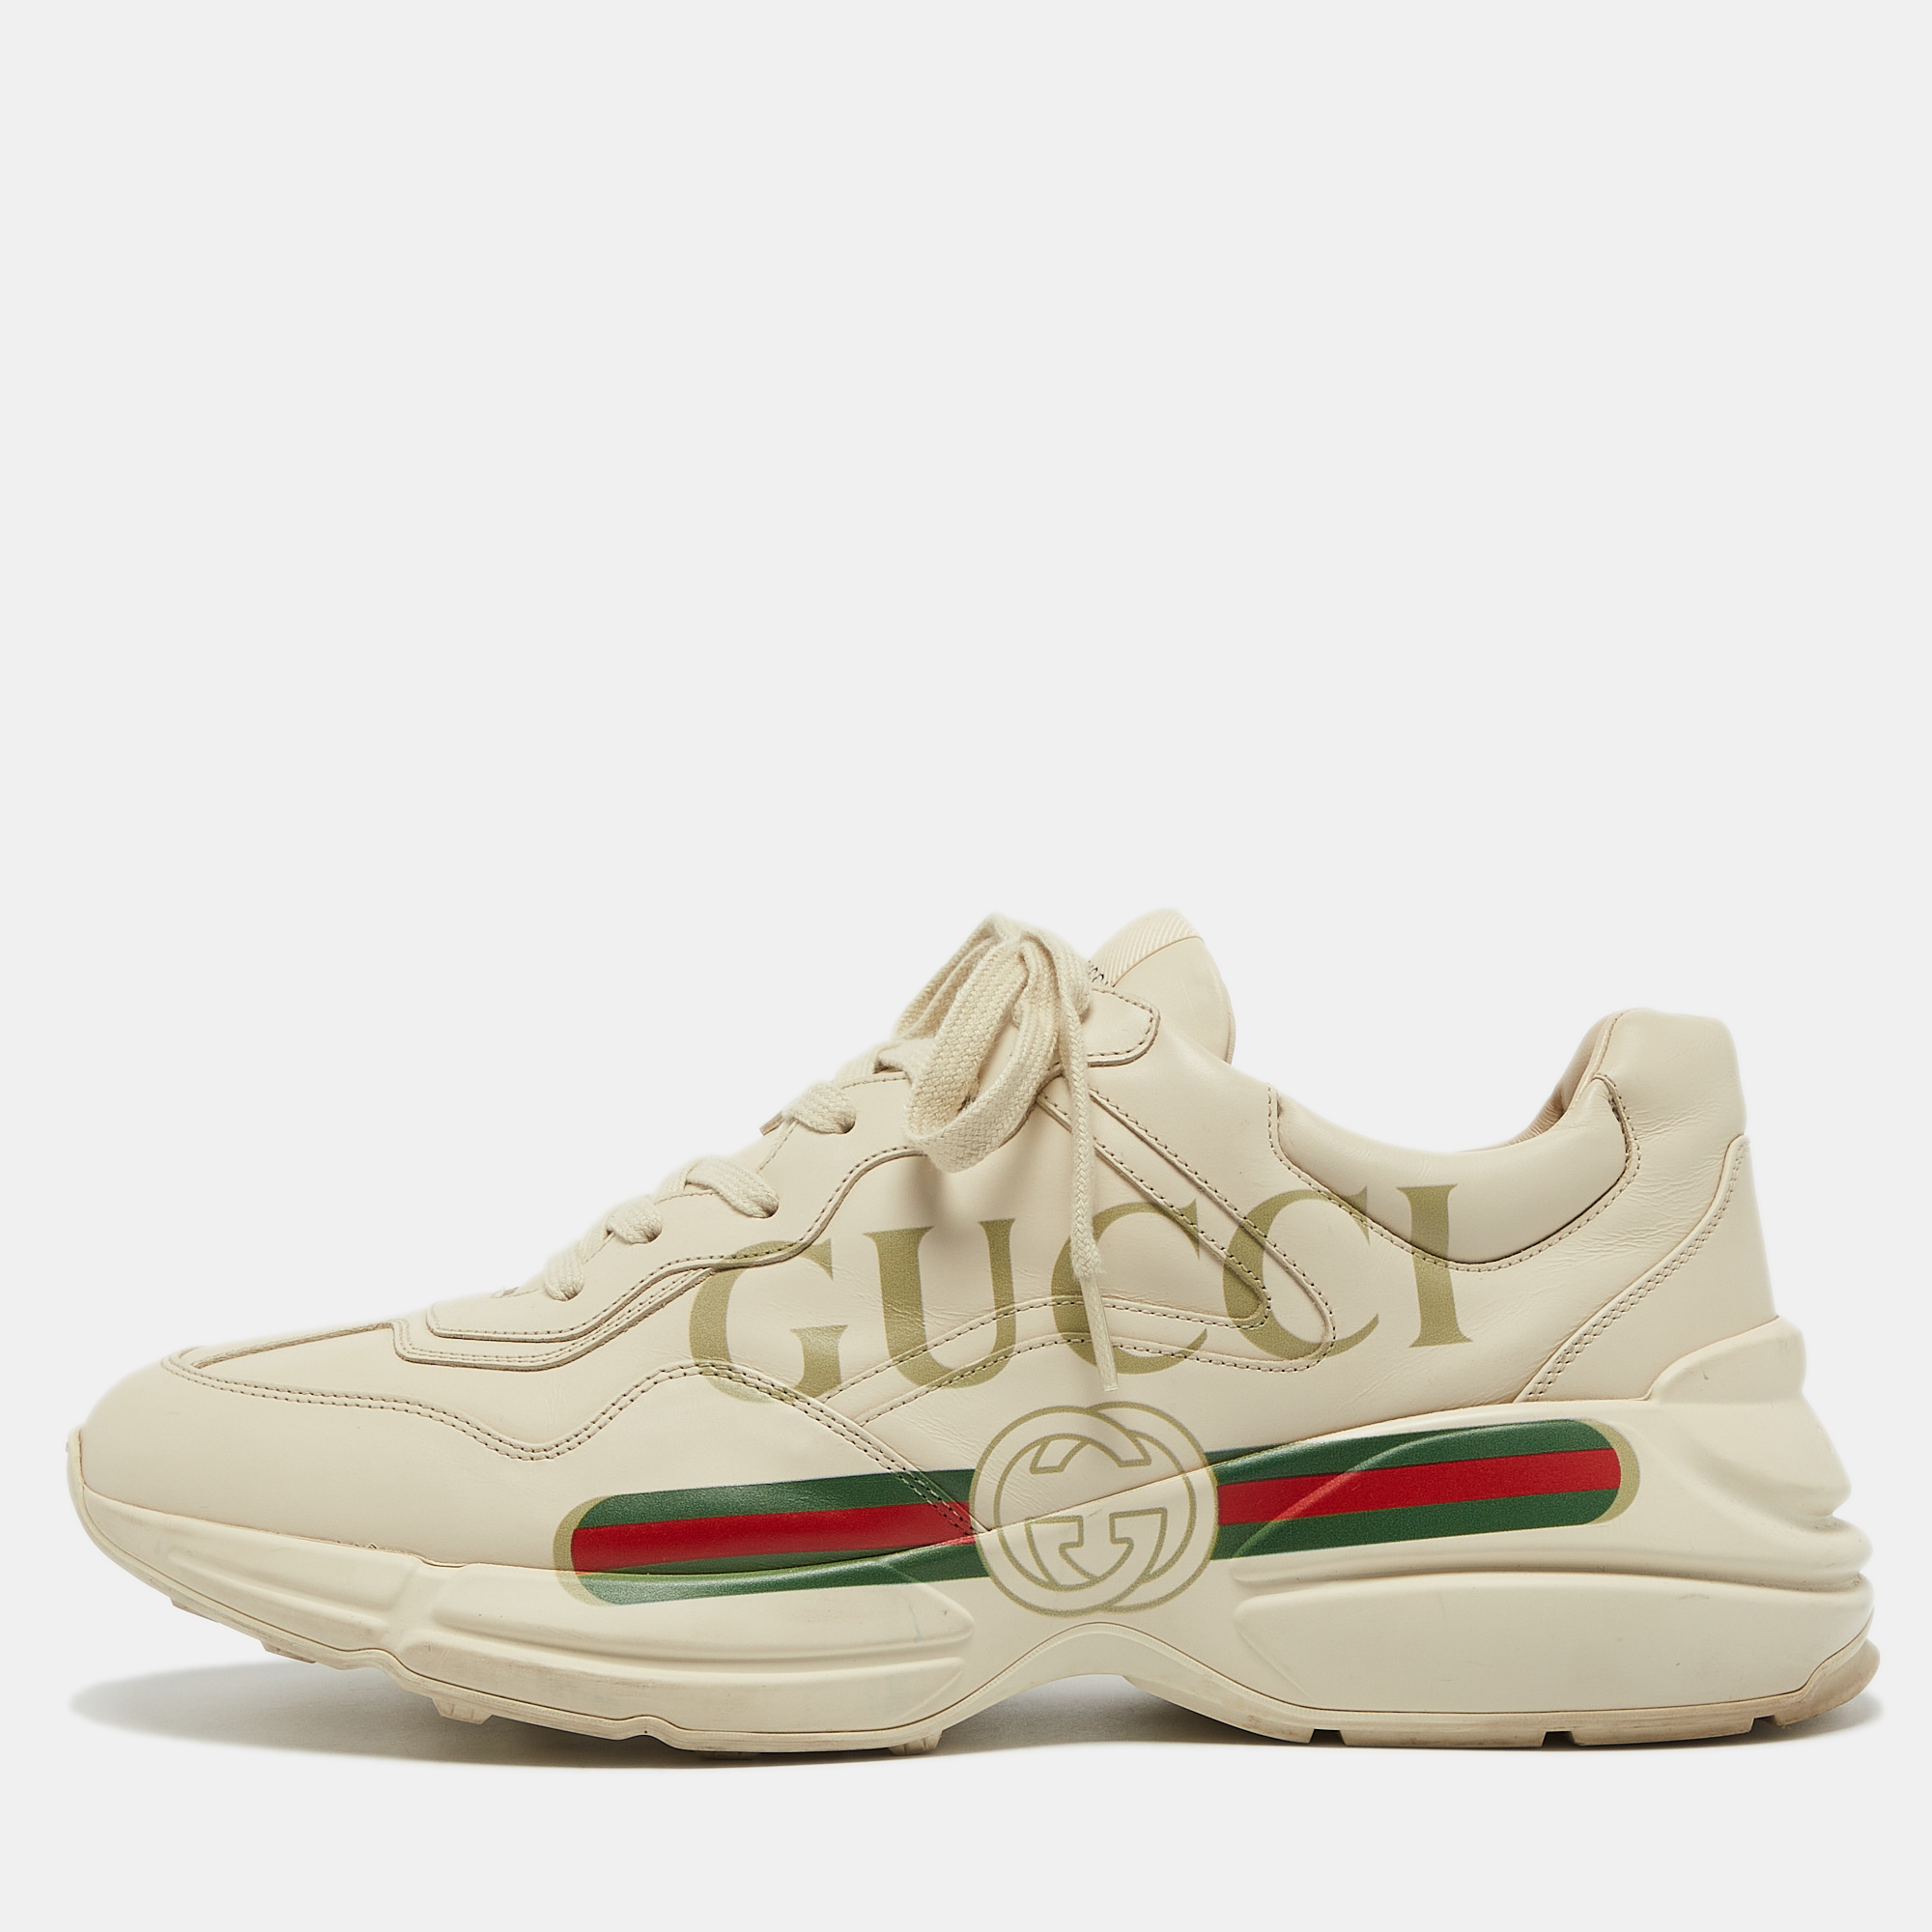 Give your outfit a luxe update with this pair of Gucci sneakers. The shoes are sewn perfectly to help you make a statement in them for a long time.